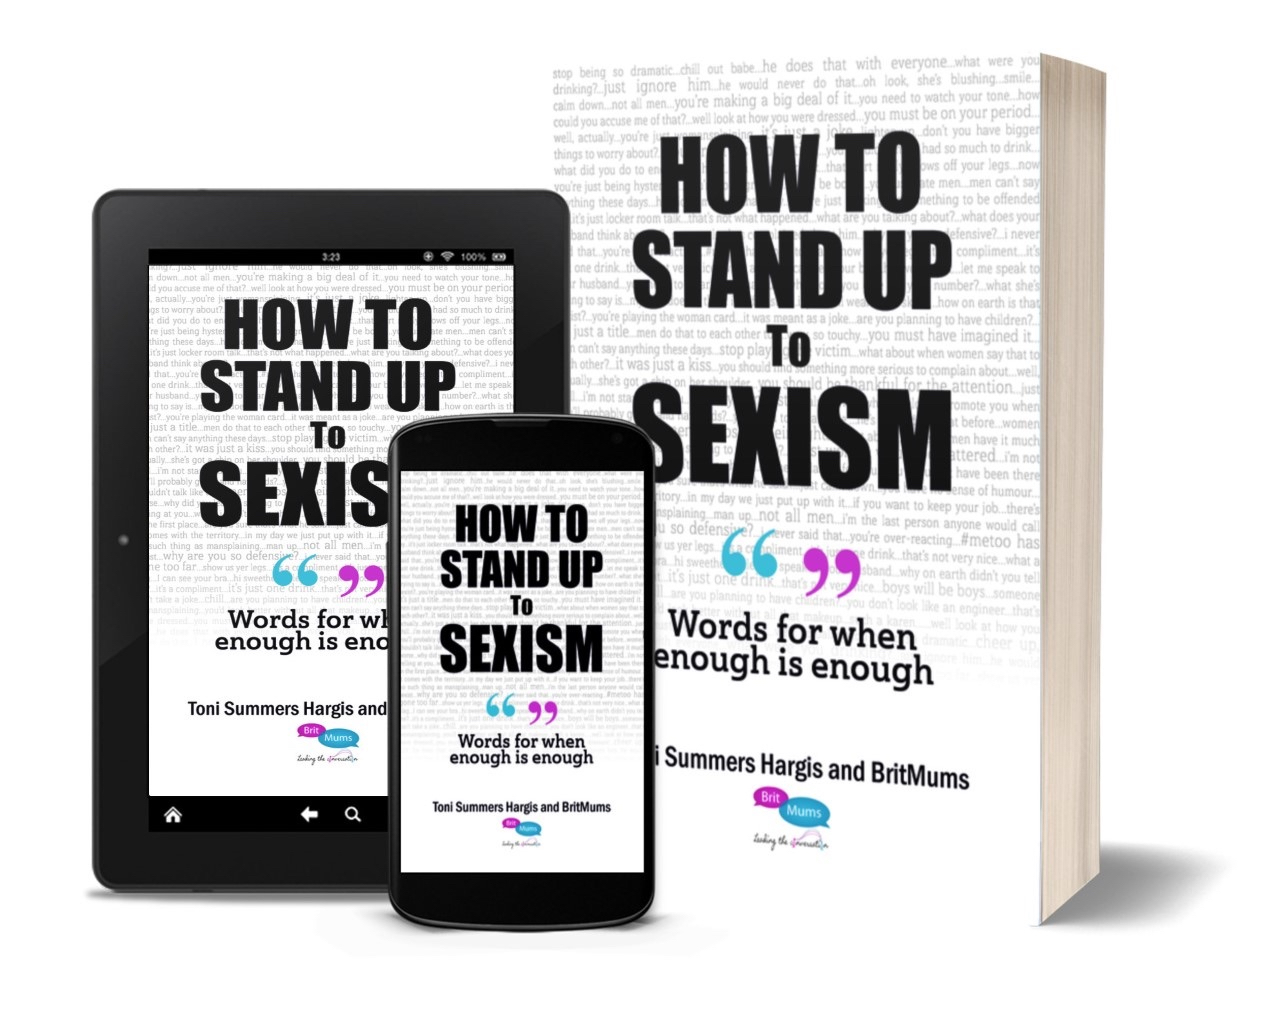 How to Stand up to Sexism Ribble FM interview: BritMums members come full circle